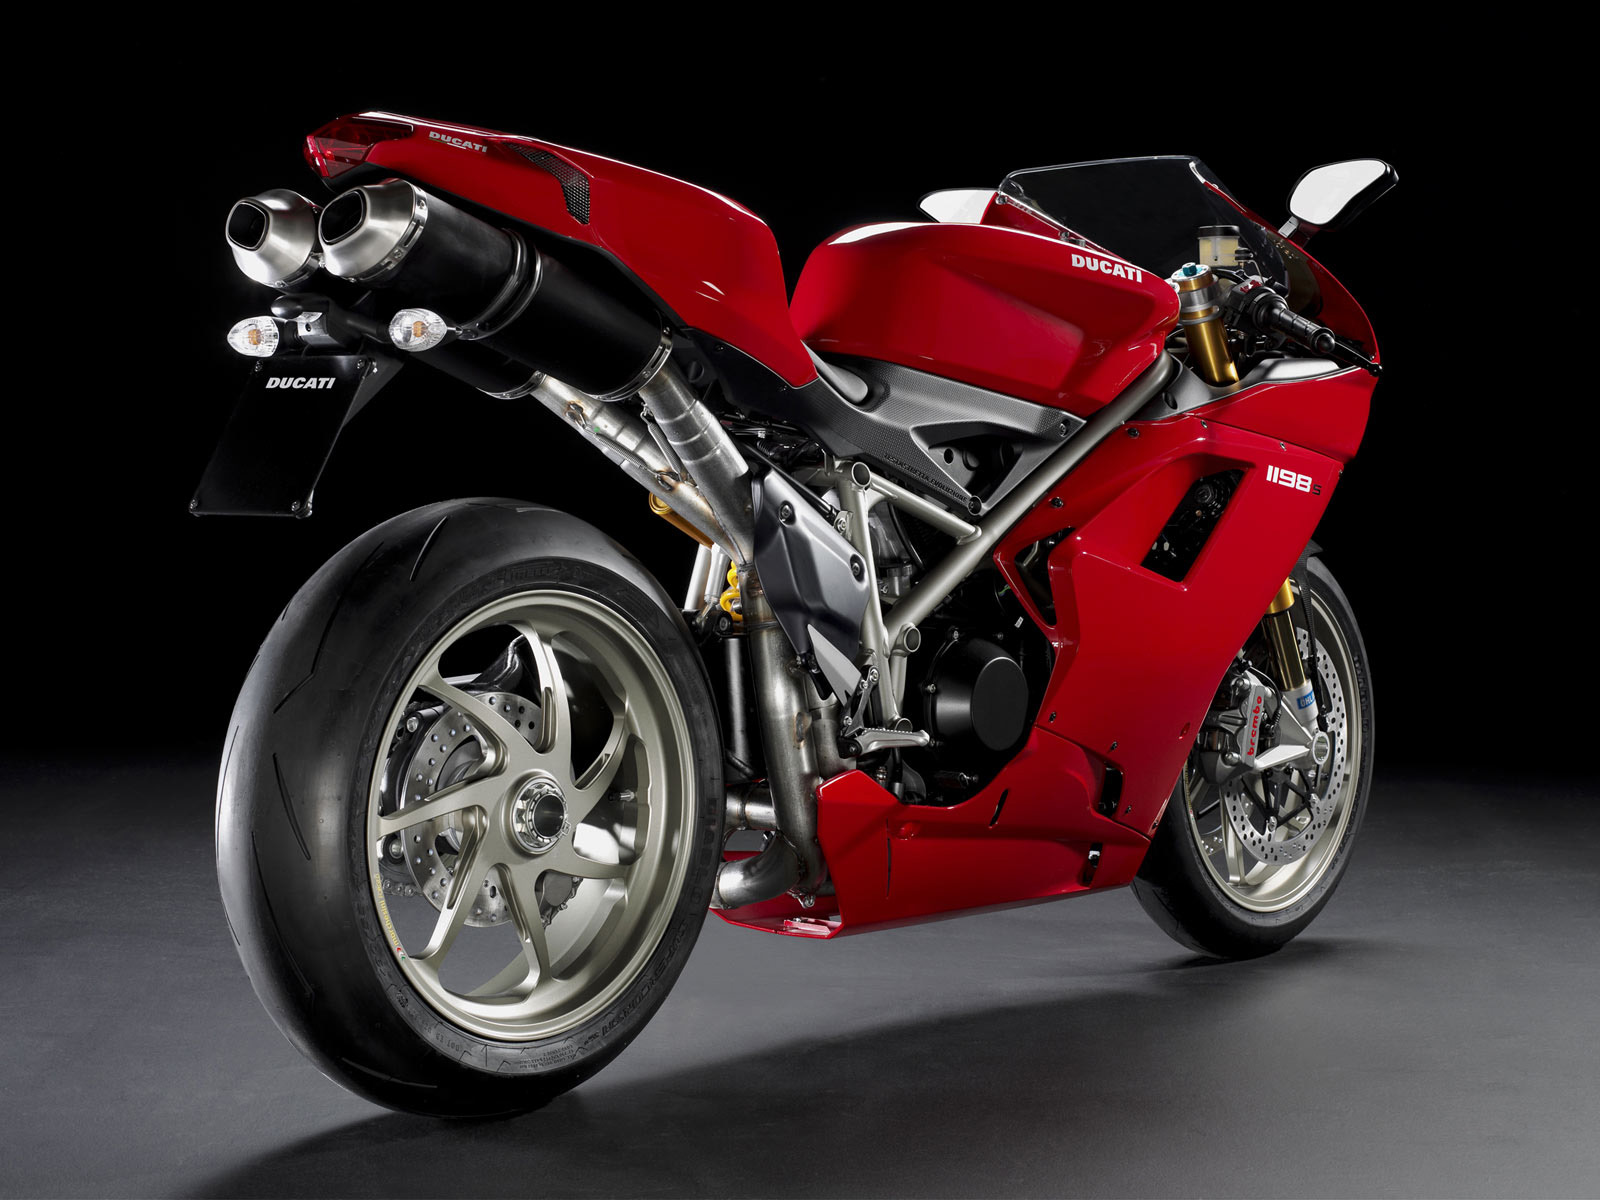 Download HQ red Ducati 1198s Motorcycle wallpaper / 1600x1200